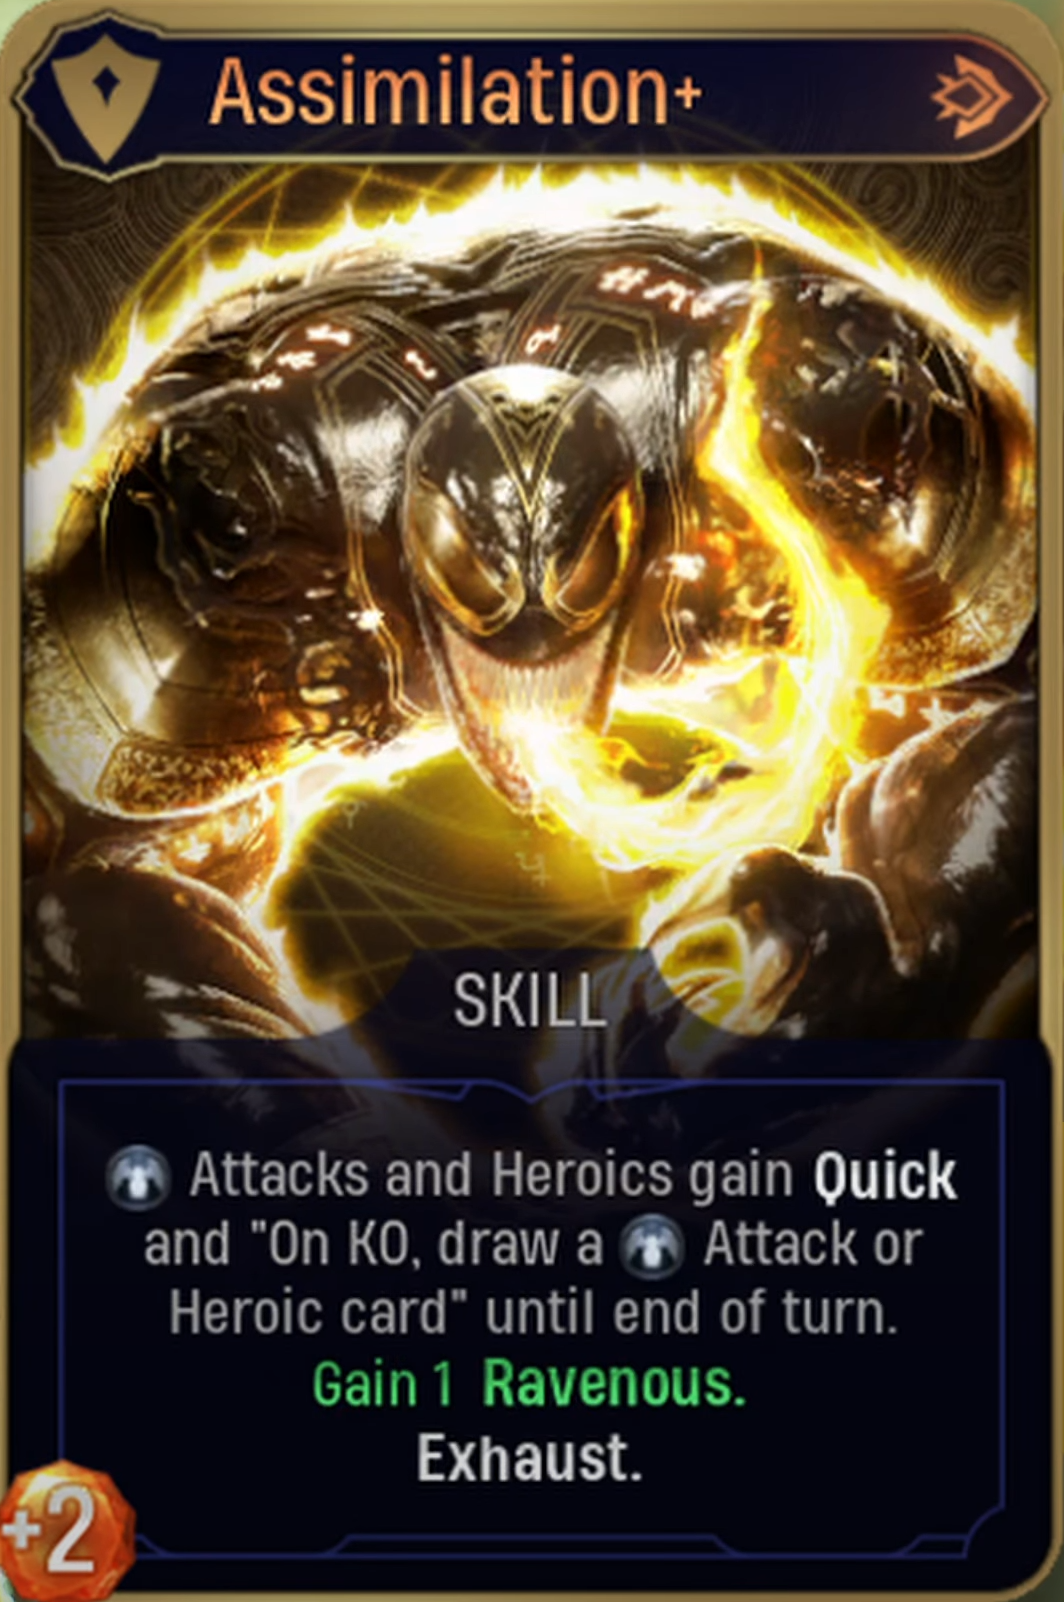 Venom's Cards and Passives are updated on the Wiki : r/midnightsuns